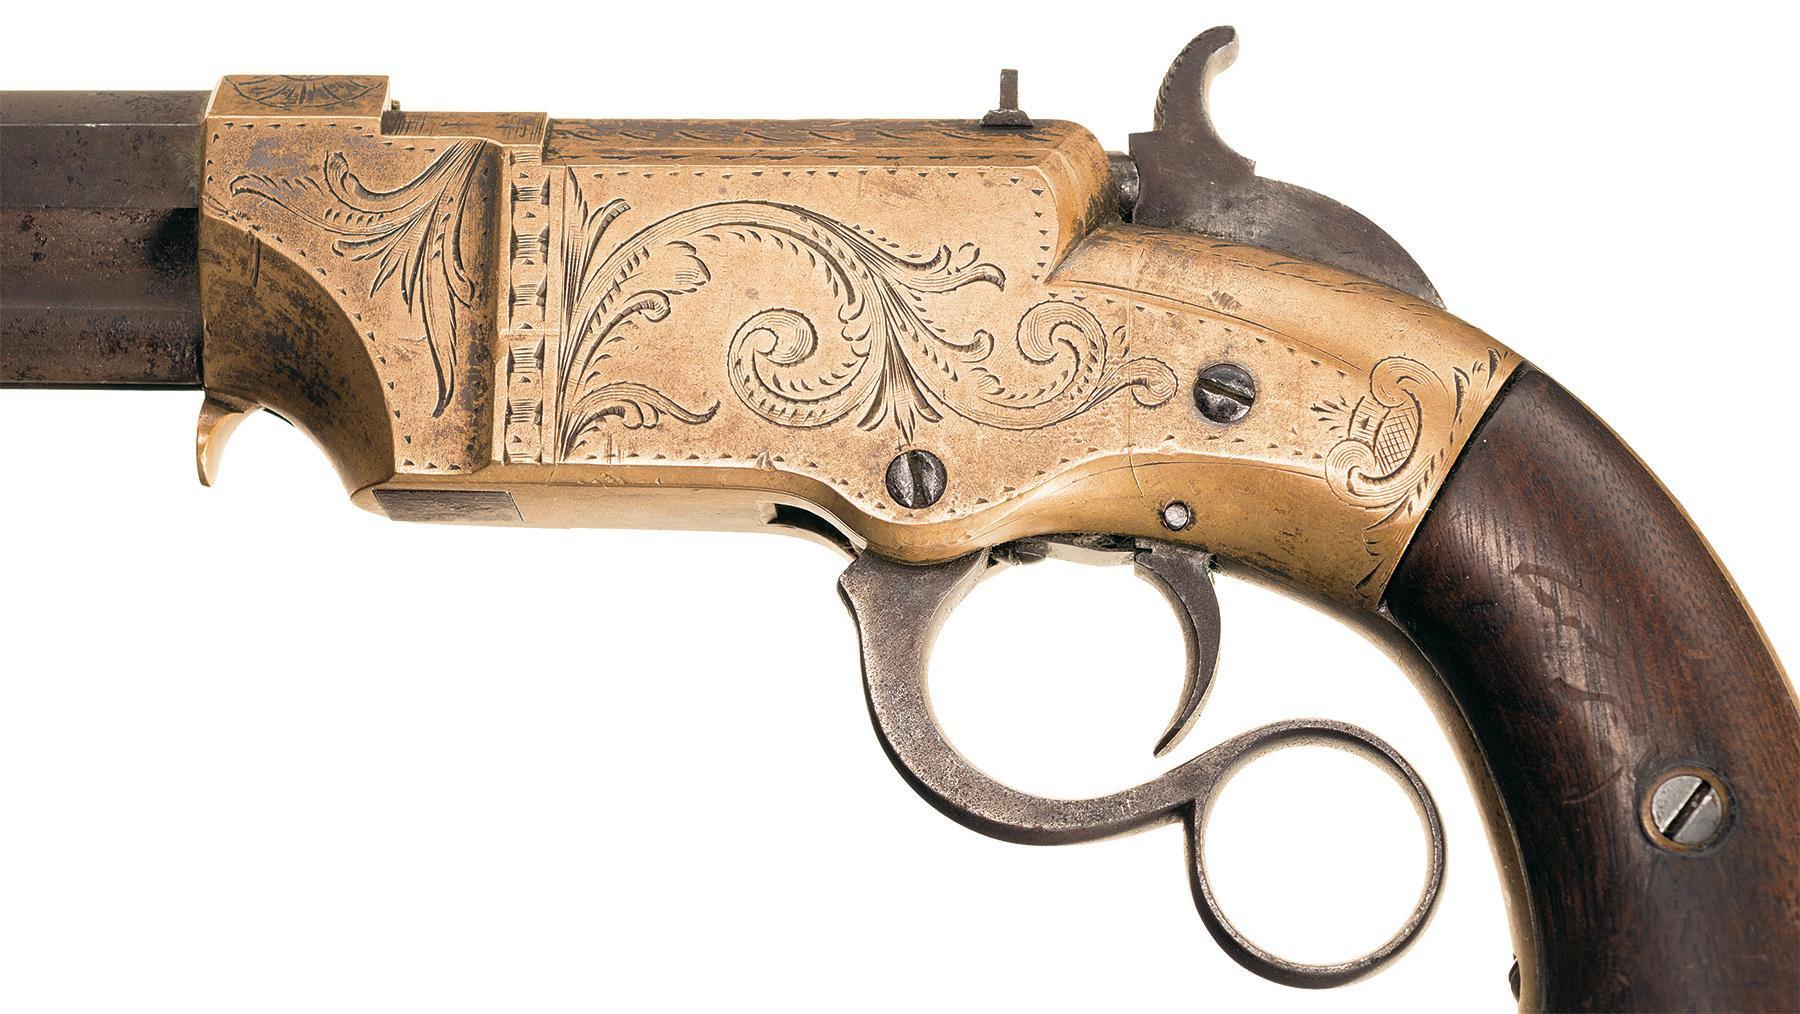 New Haven Arms Co. Volcanic Pistol 31 Volcanic